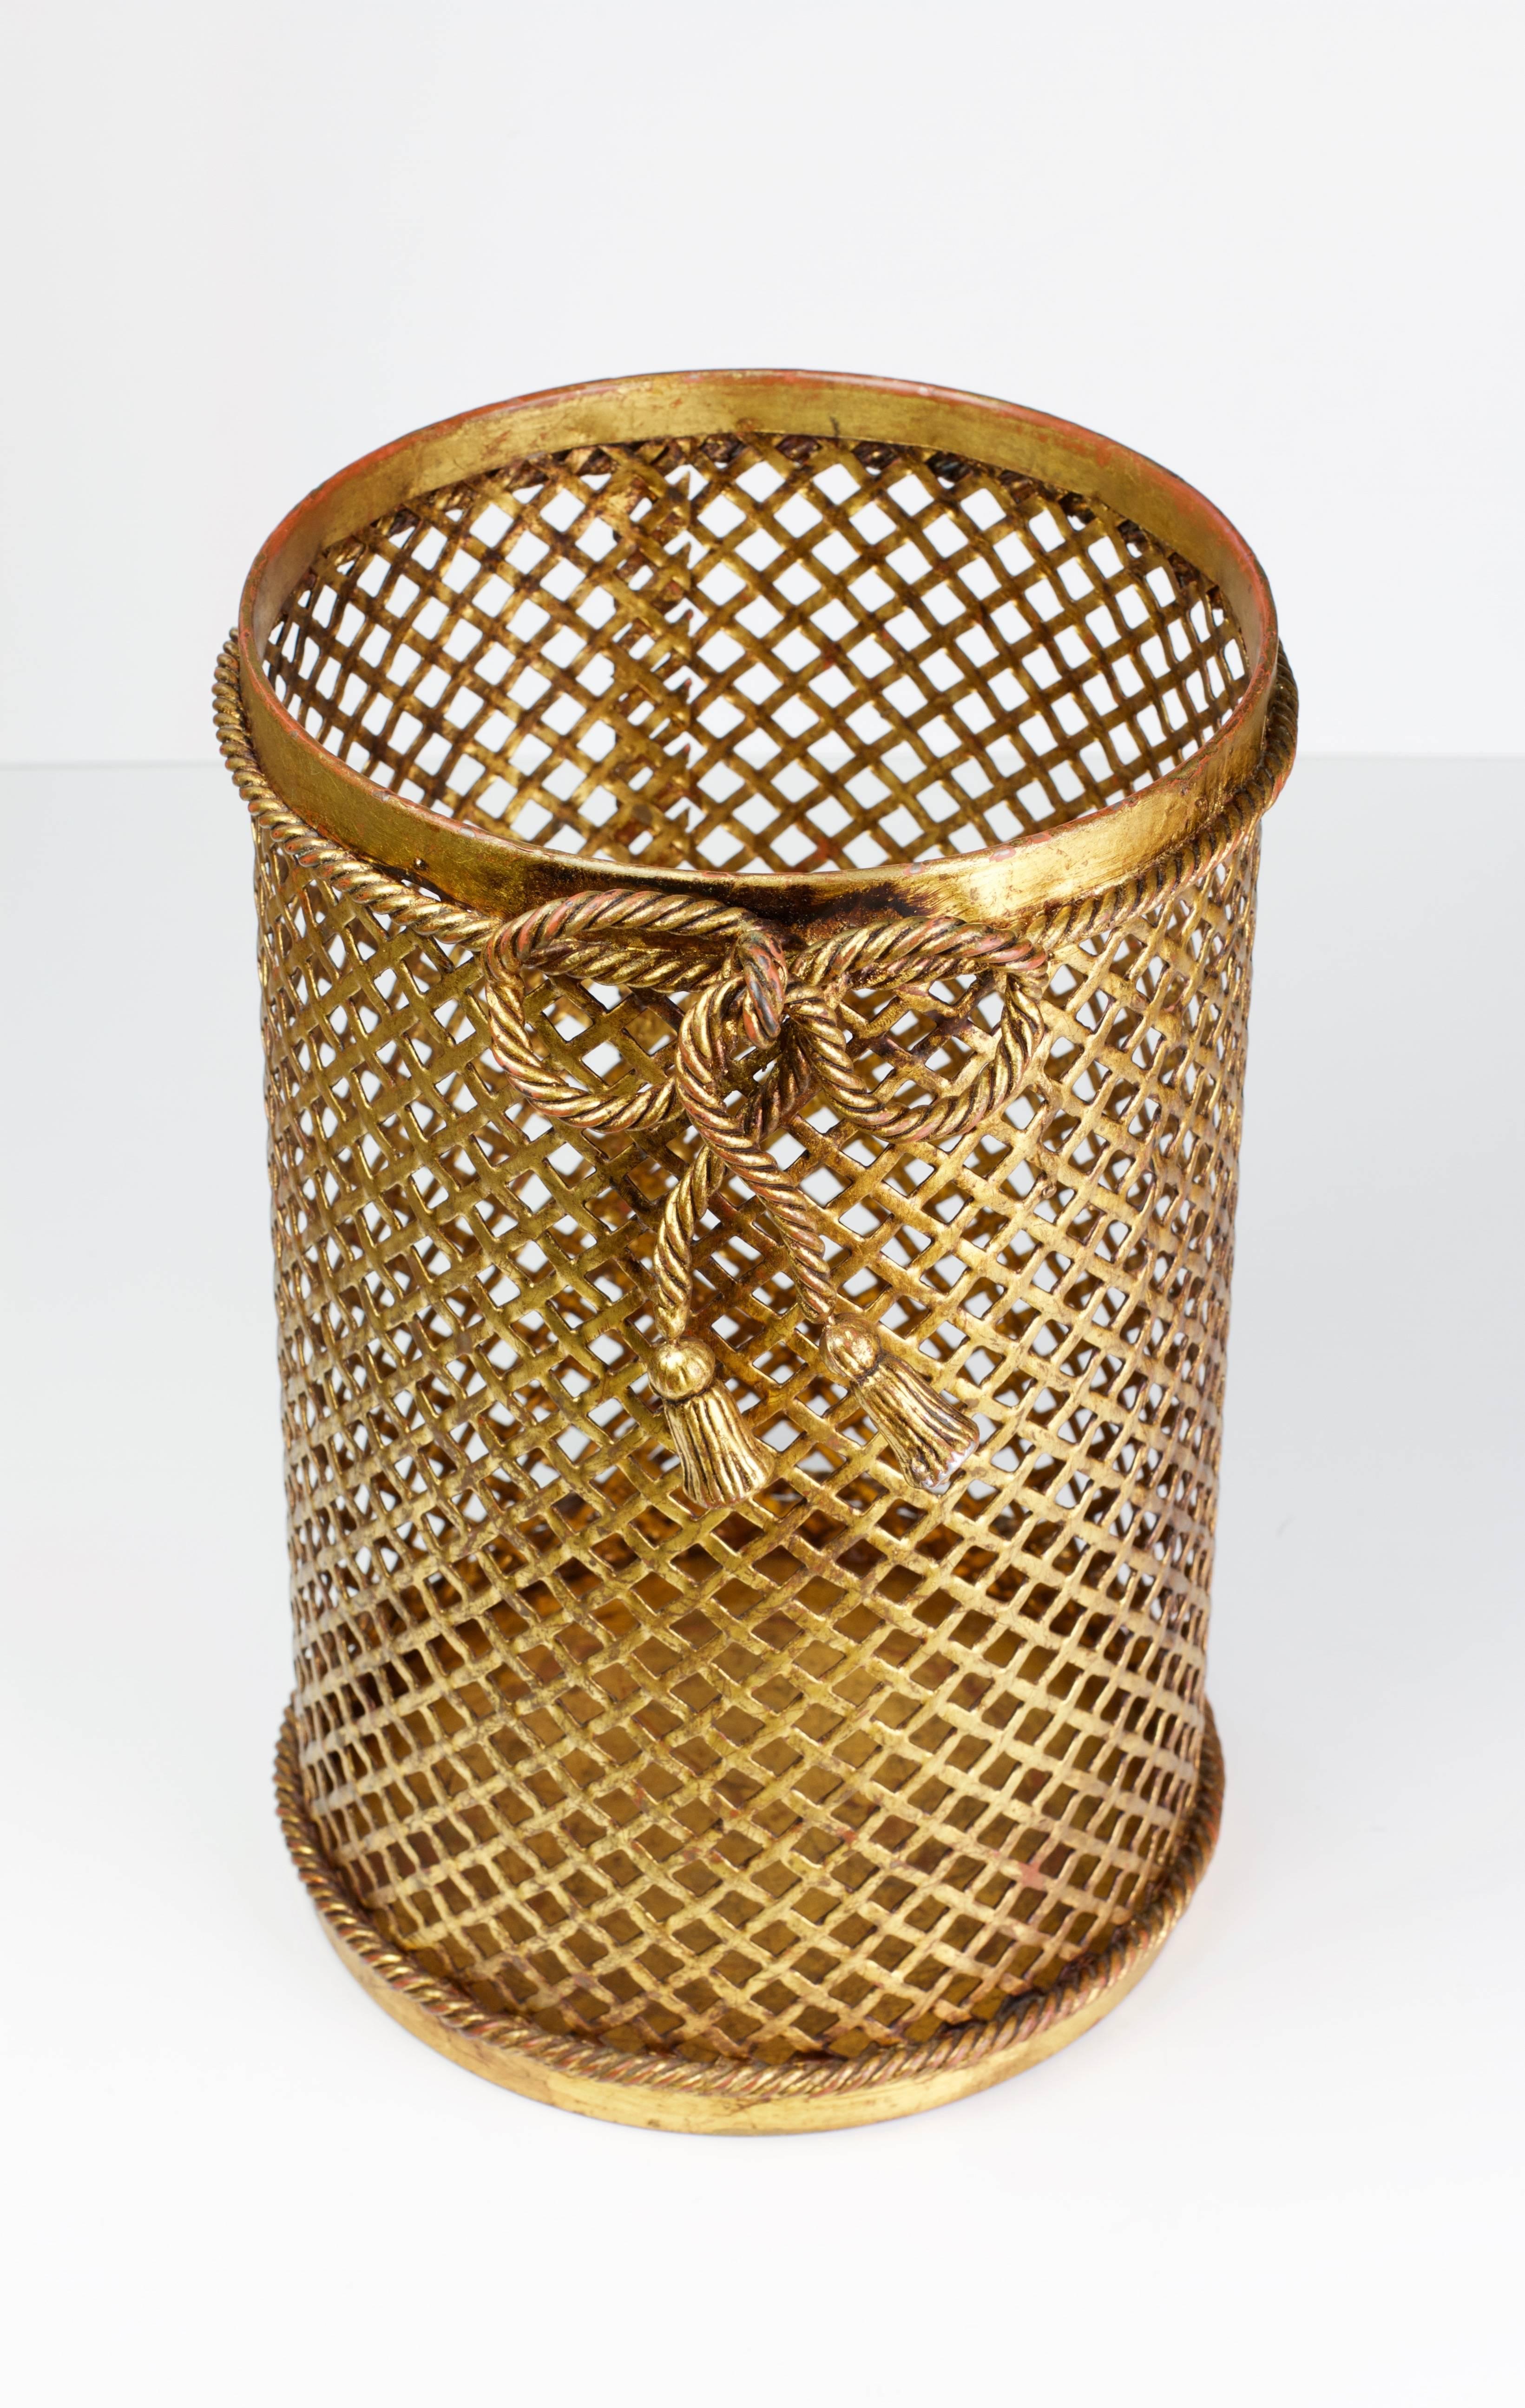 Stunning & vintage gold / gilt / gilded Hollywood Regency style trash can / bin / waste paper basket made in Italy, circa 1950. The perforated lattice patterned metalwork with bent rope and tassel details finishes the piece perfectly. Quite rare to